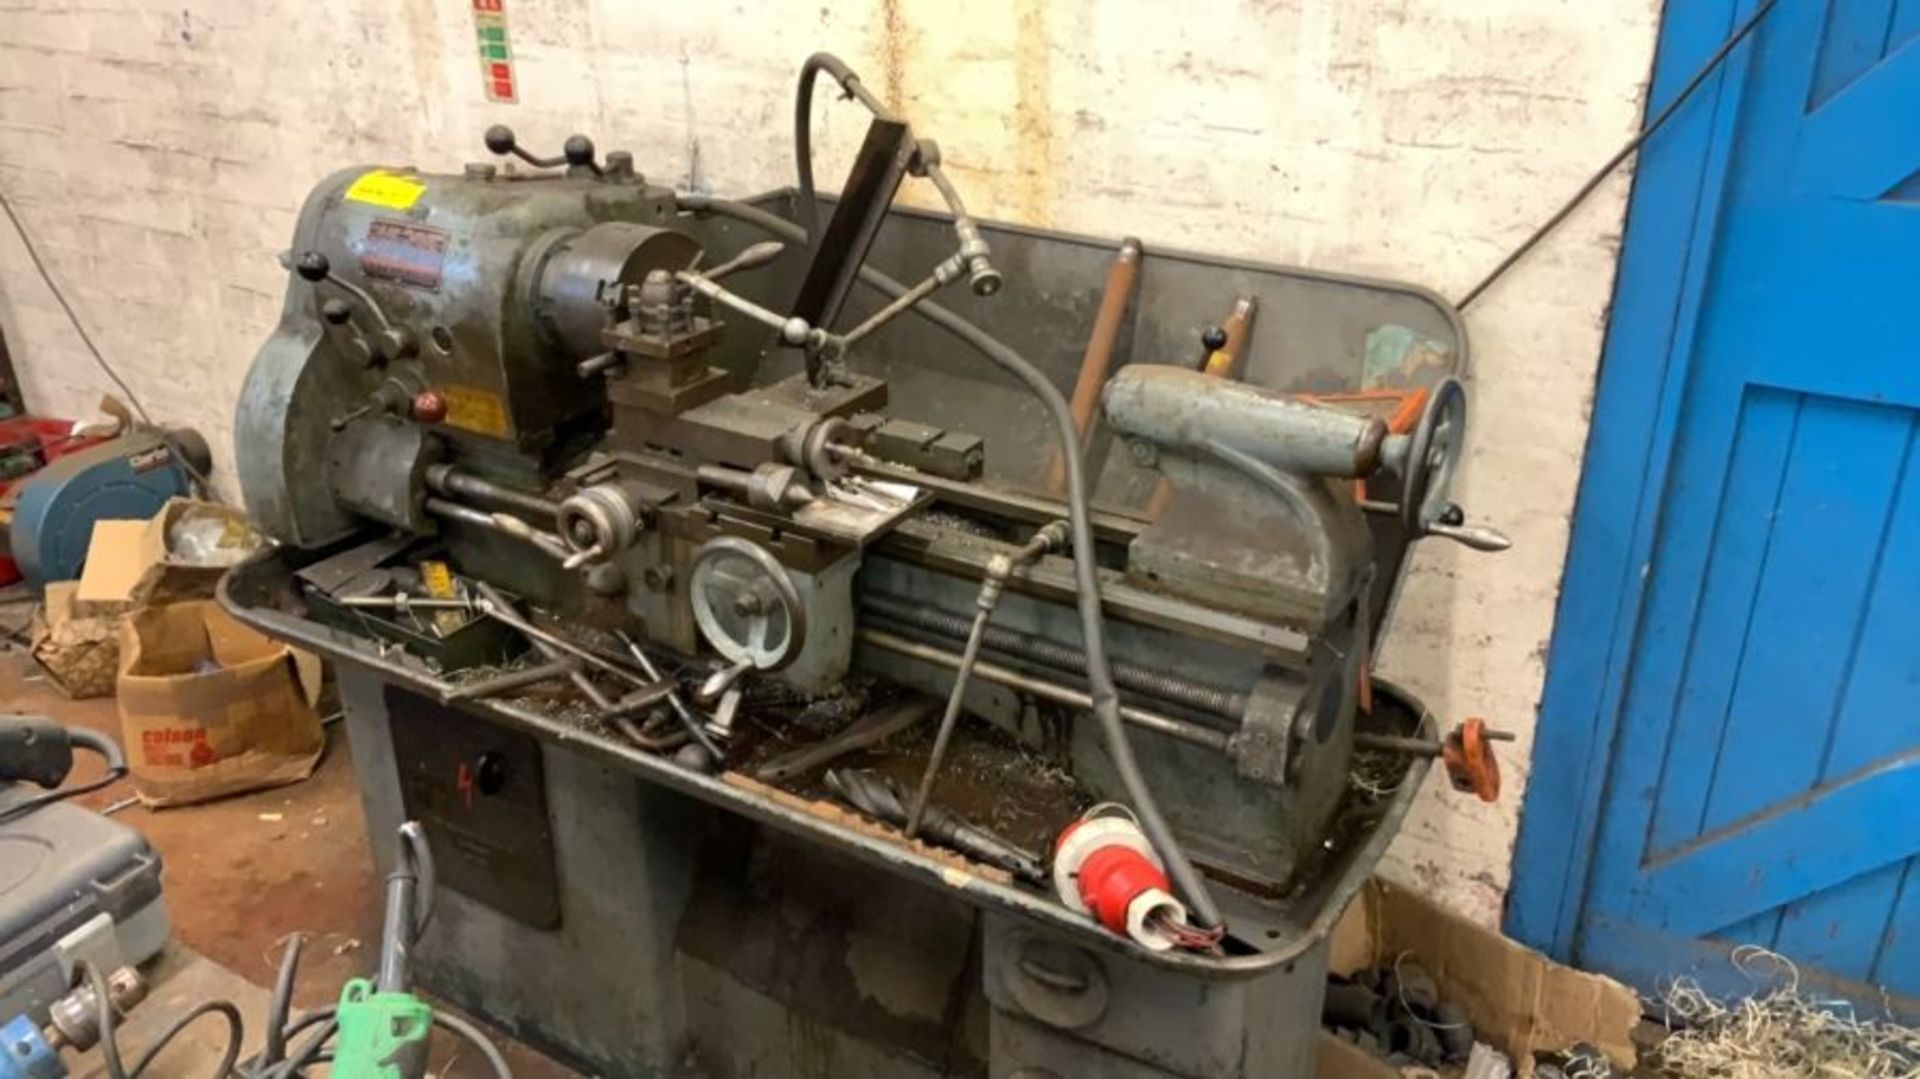 Alfred Herbert 6" Student Lathe 3 phase electrics with 415V Disconnection Plug, with Guards, Drills, - Image 3 of 32